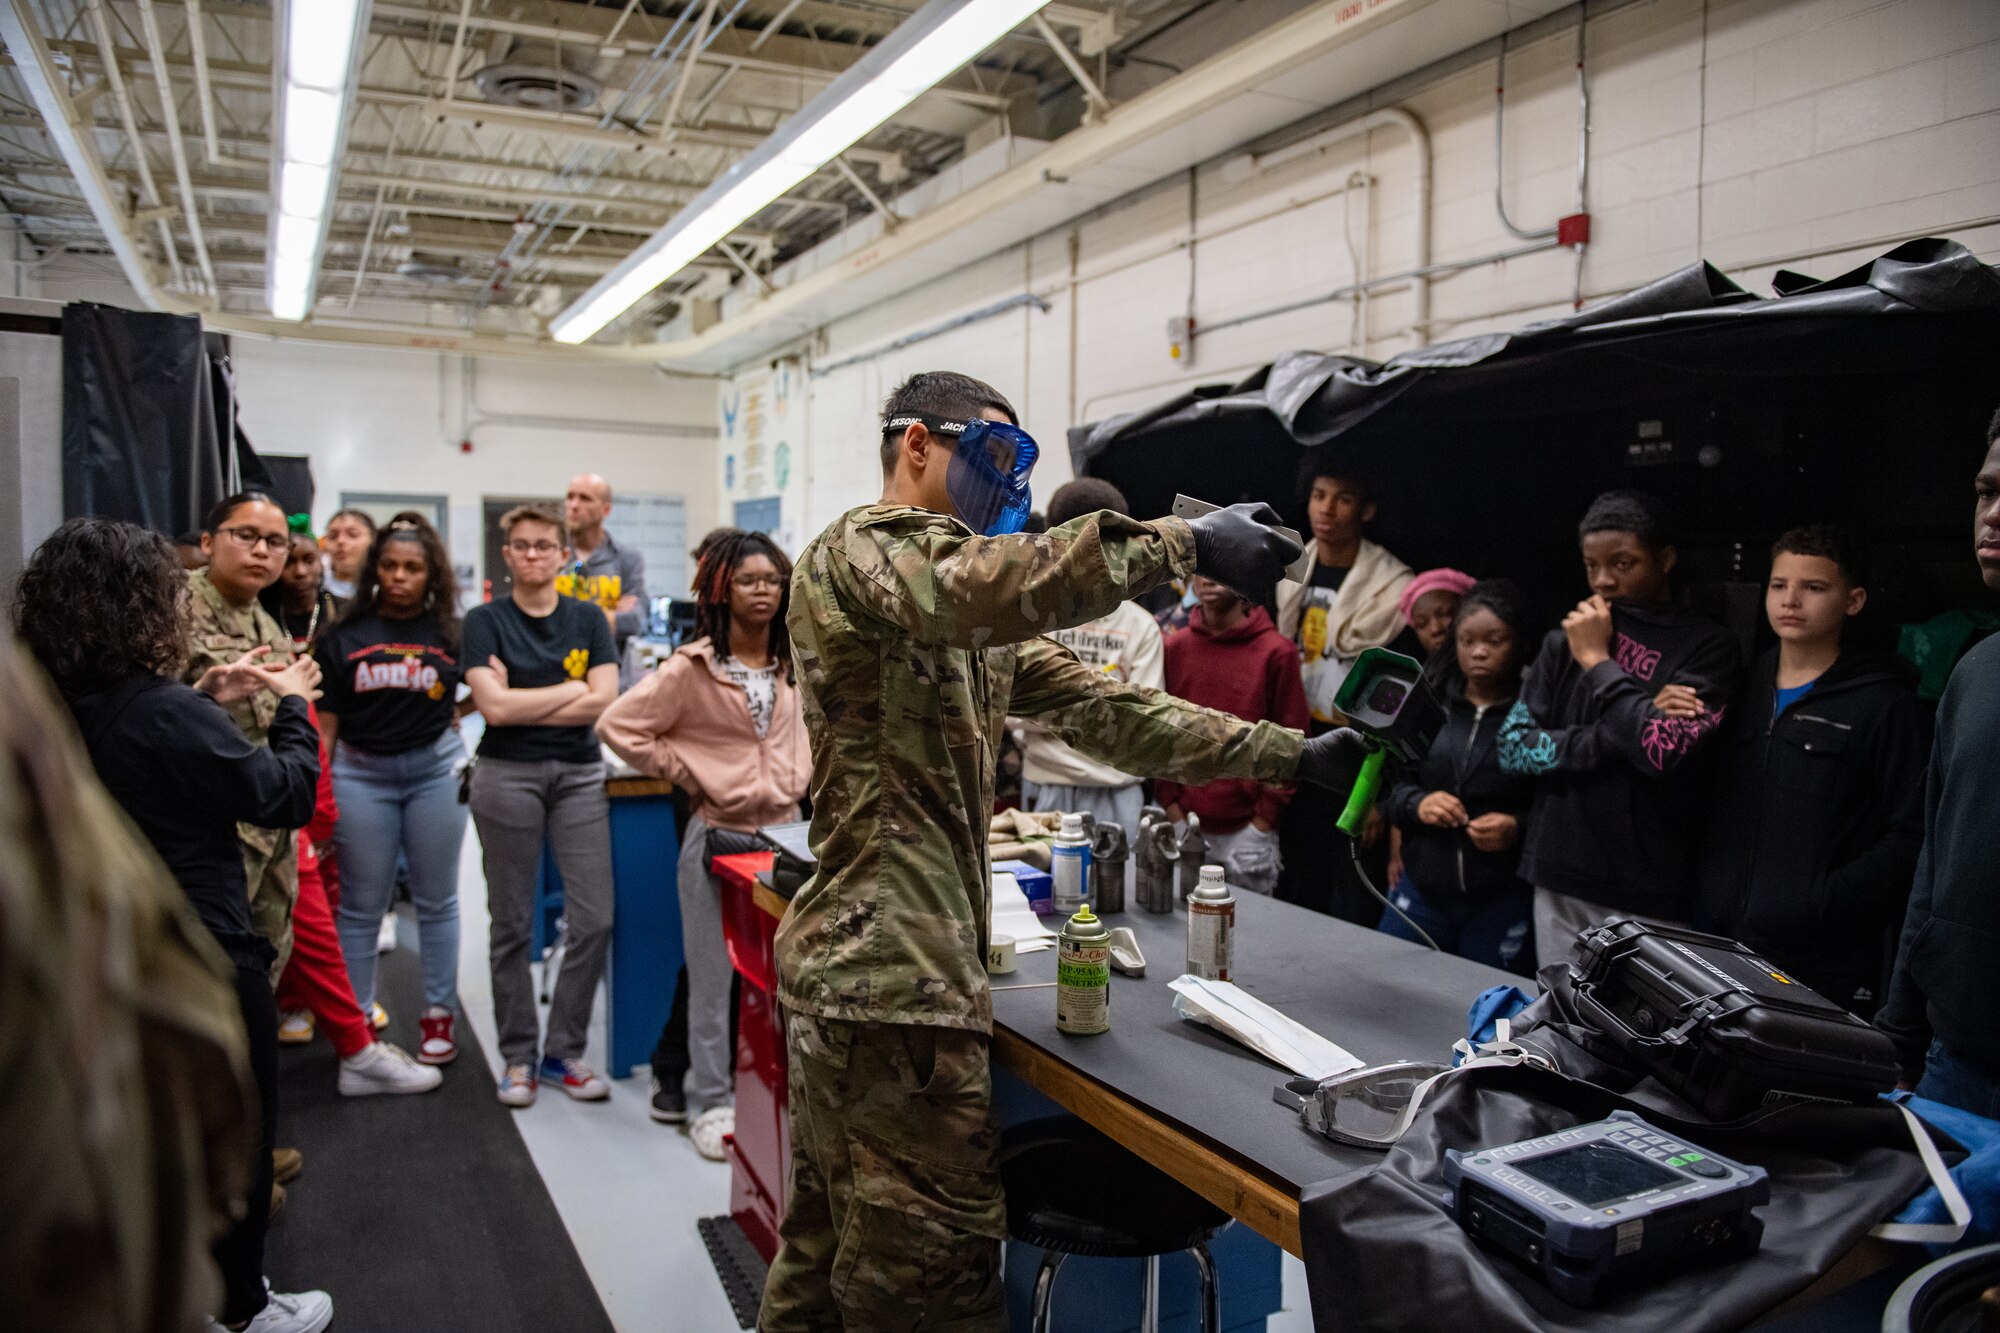 U.S. Air Force Airman 1st Class Ryan Leza, 23rd Maintenance Squadron nondestructive inspection apprentice, gives a demonstration to Valdosta Middle School students at Moody Air Force Base, Georgia, March, 15, 2024. The students toured Moody AFB during Women in Aviation Week. Team Moody’s annual WIA events aim to highlight aviation-related career fields and inspire local youth to consider futures in the Air Force. (U.S. Air Force photo by Senior Airman Courtney Sebastianelli)